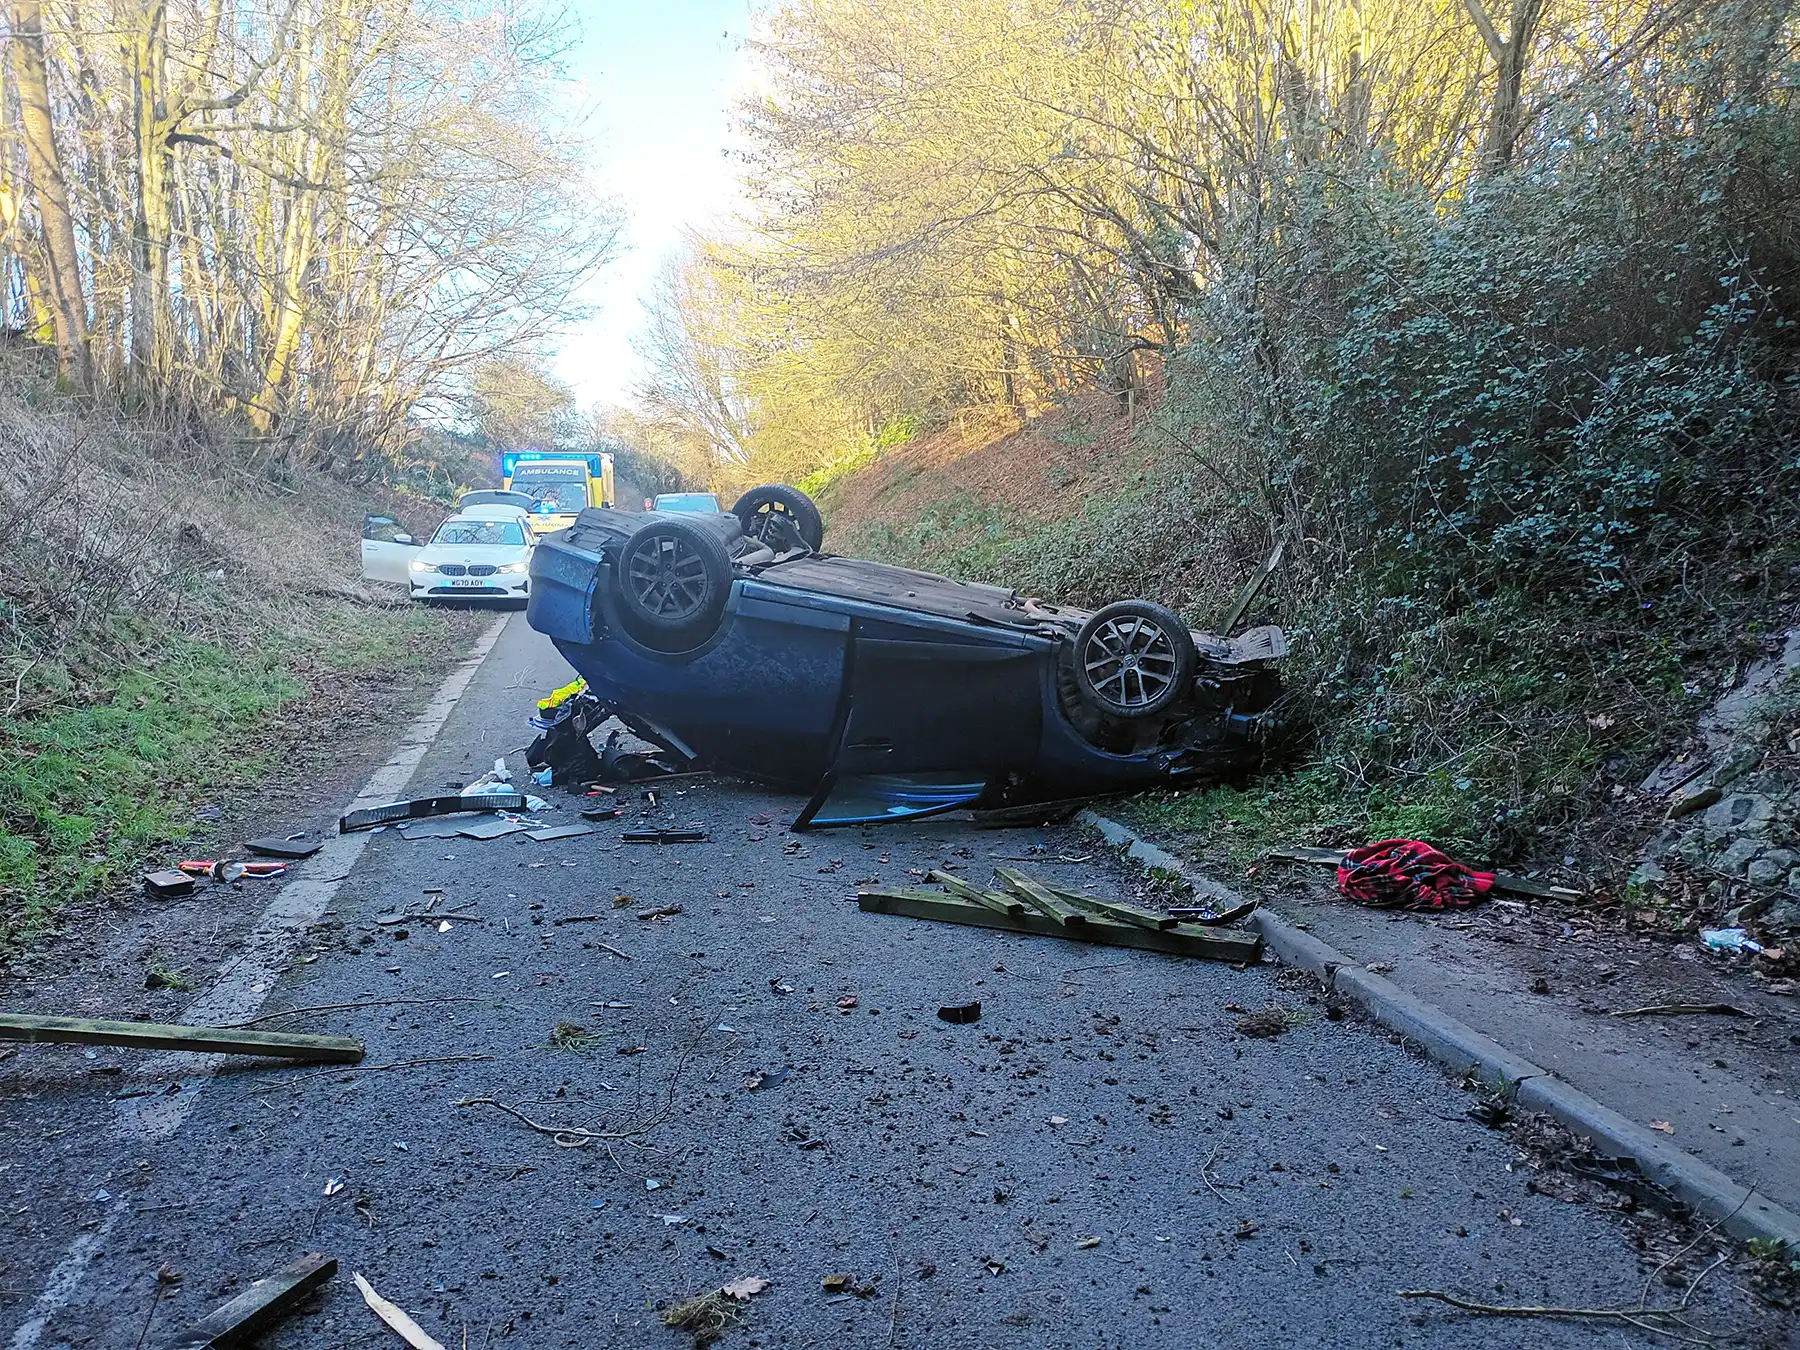 The car came to rest on the road below the A303 after crashing off at bridge near Wolverton. Picture: Philip Schofield